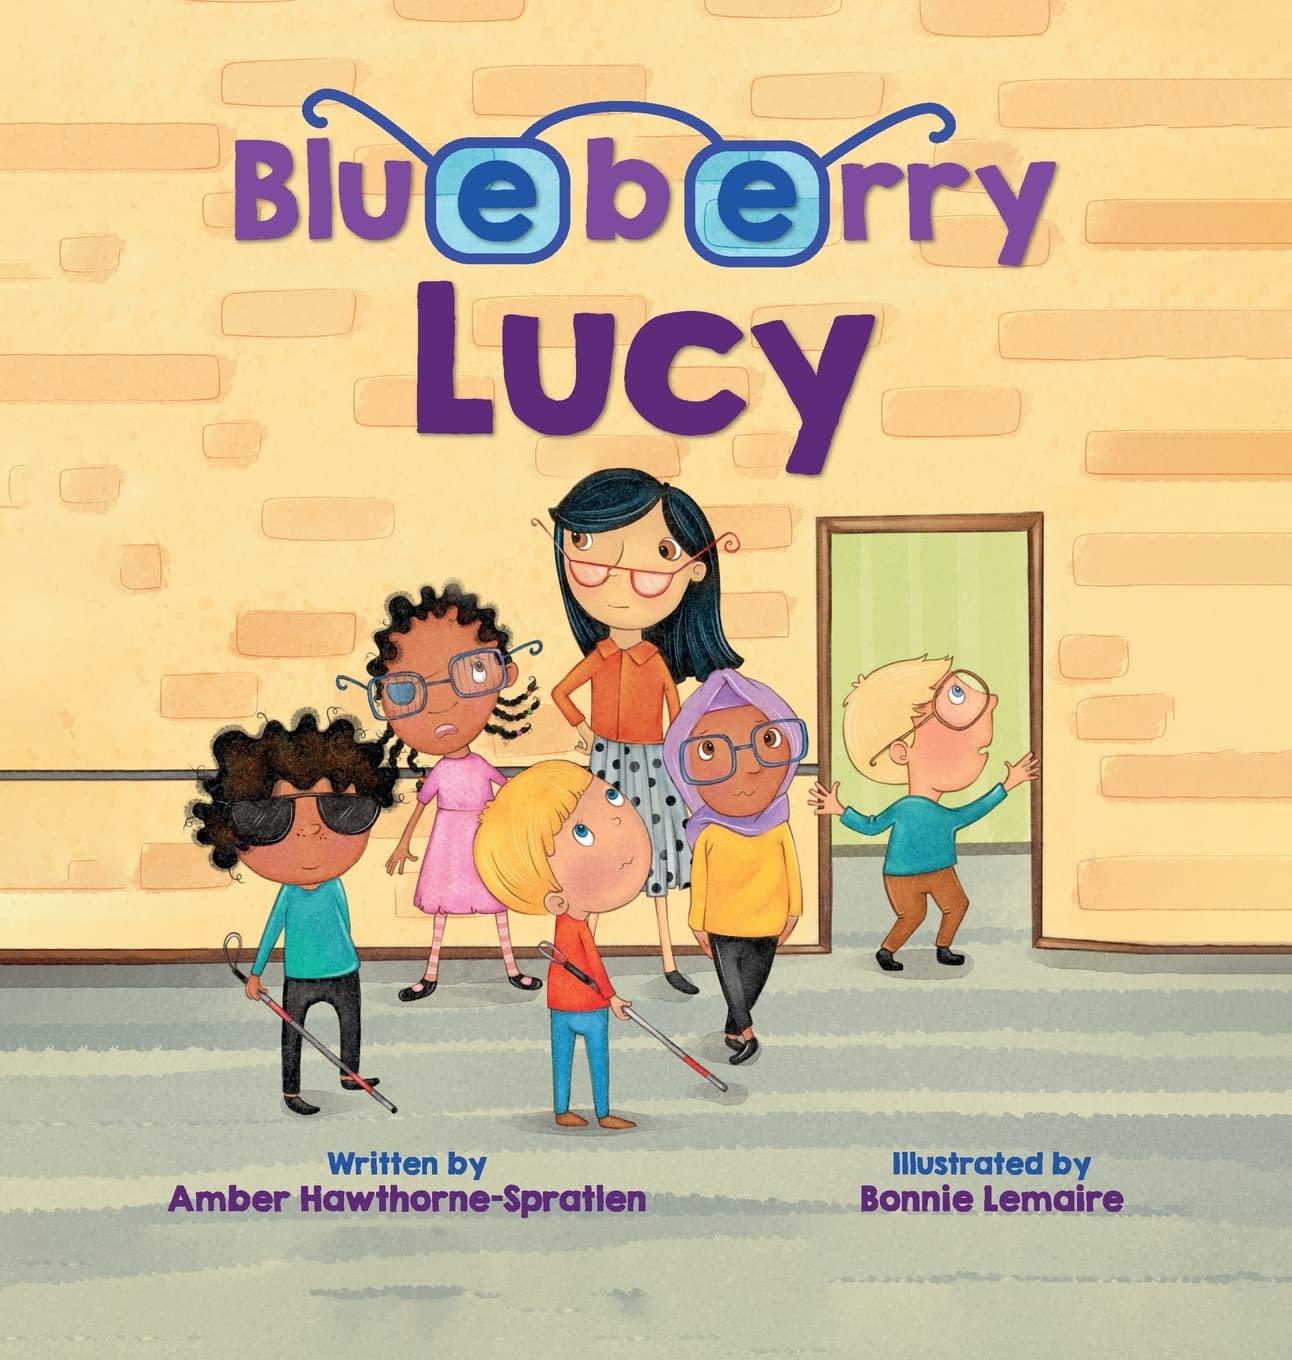 Blueberry Lucy